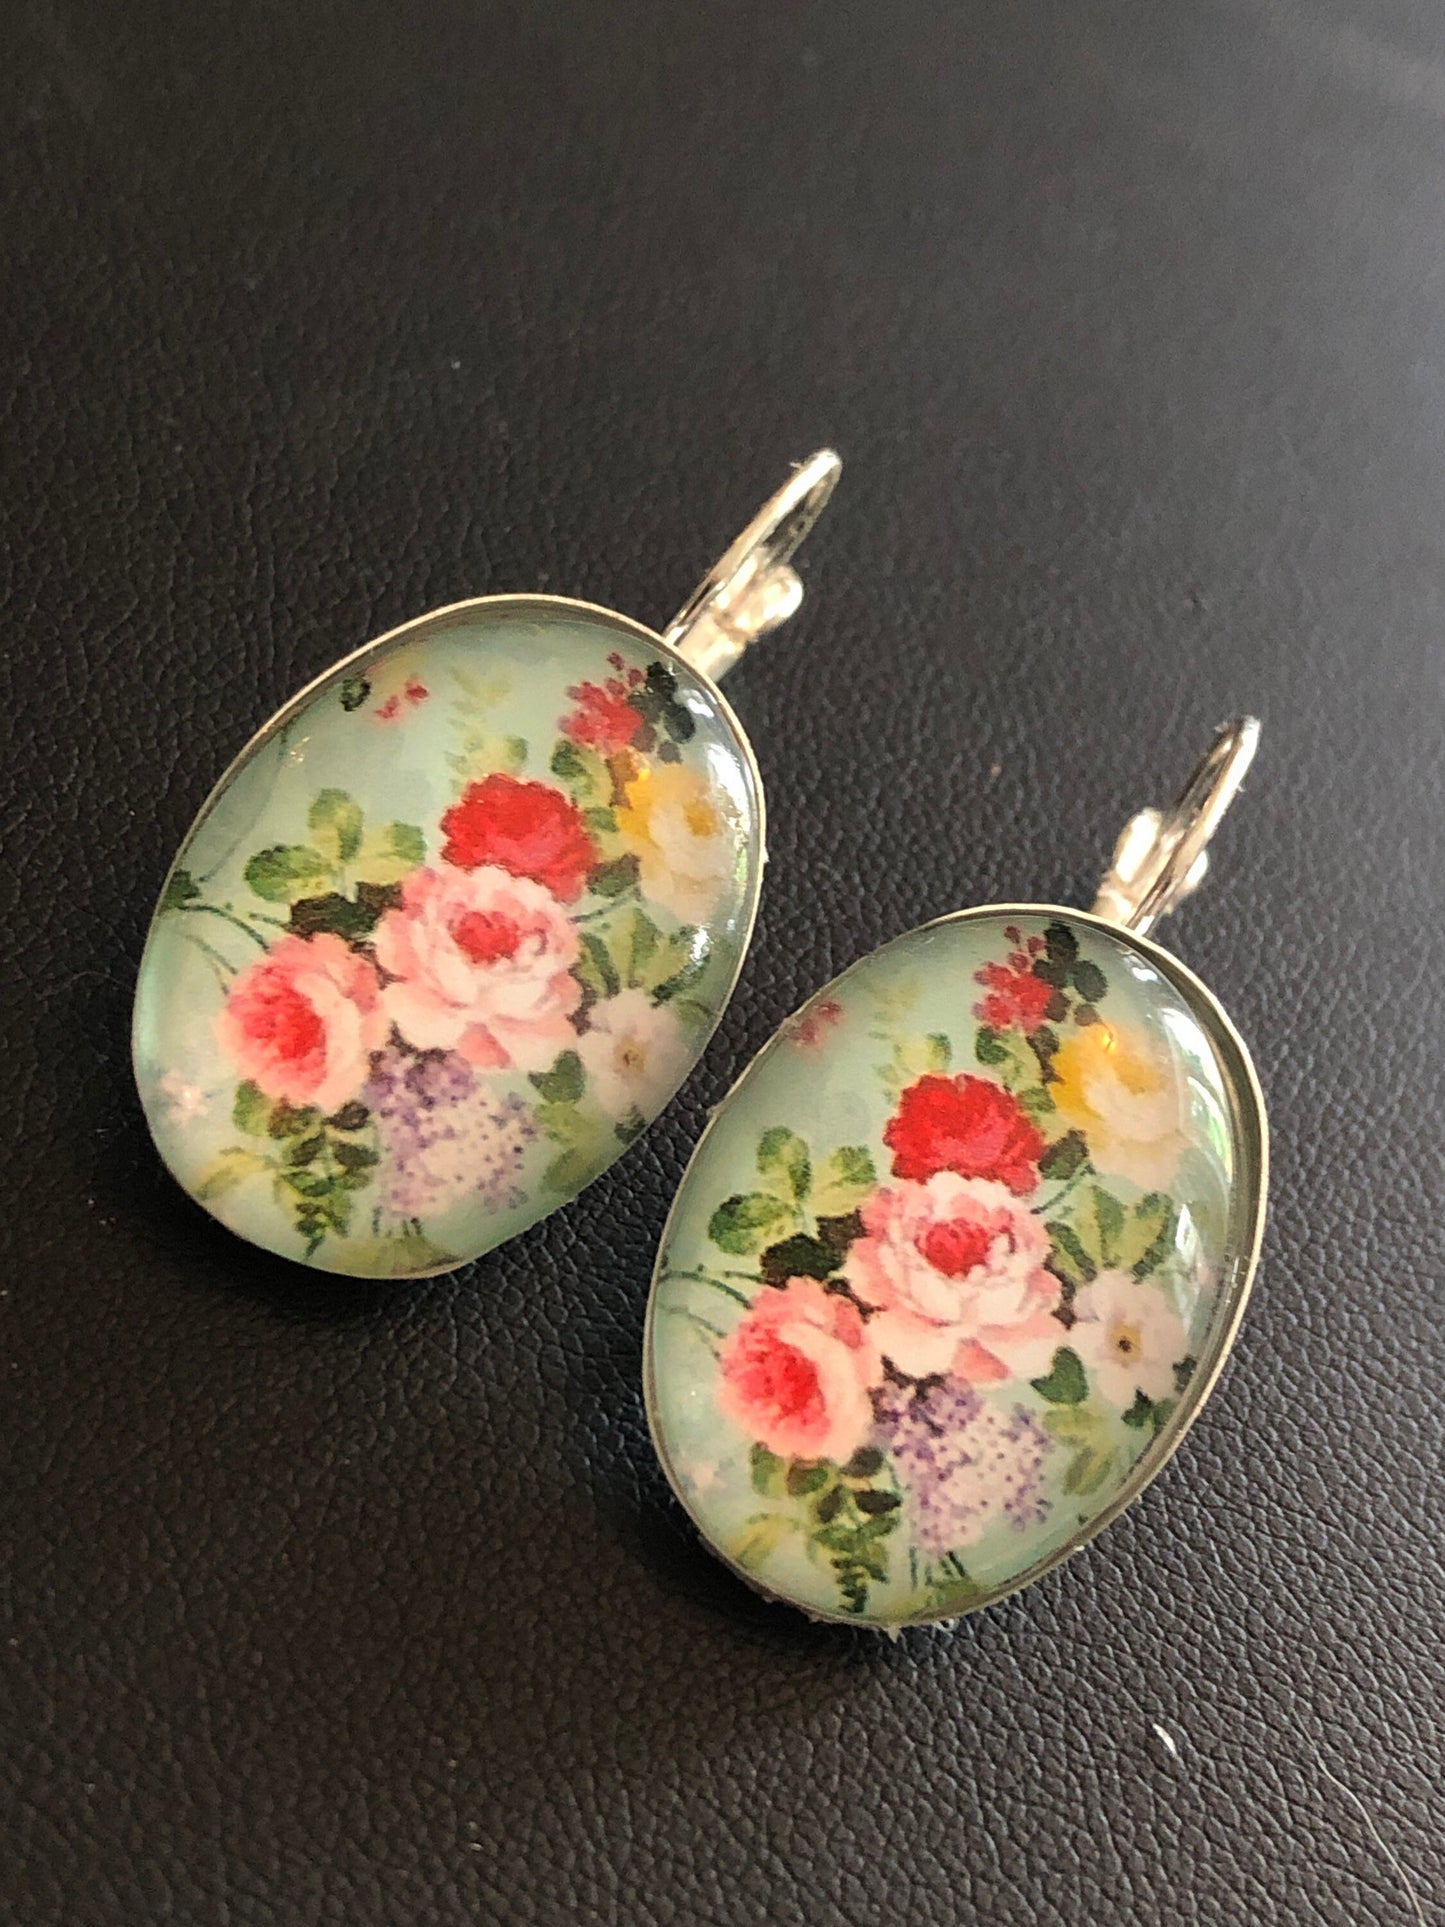 Red Pink roses Spring garden flowers oval glass cabochon floral earrings